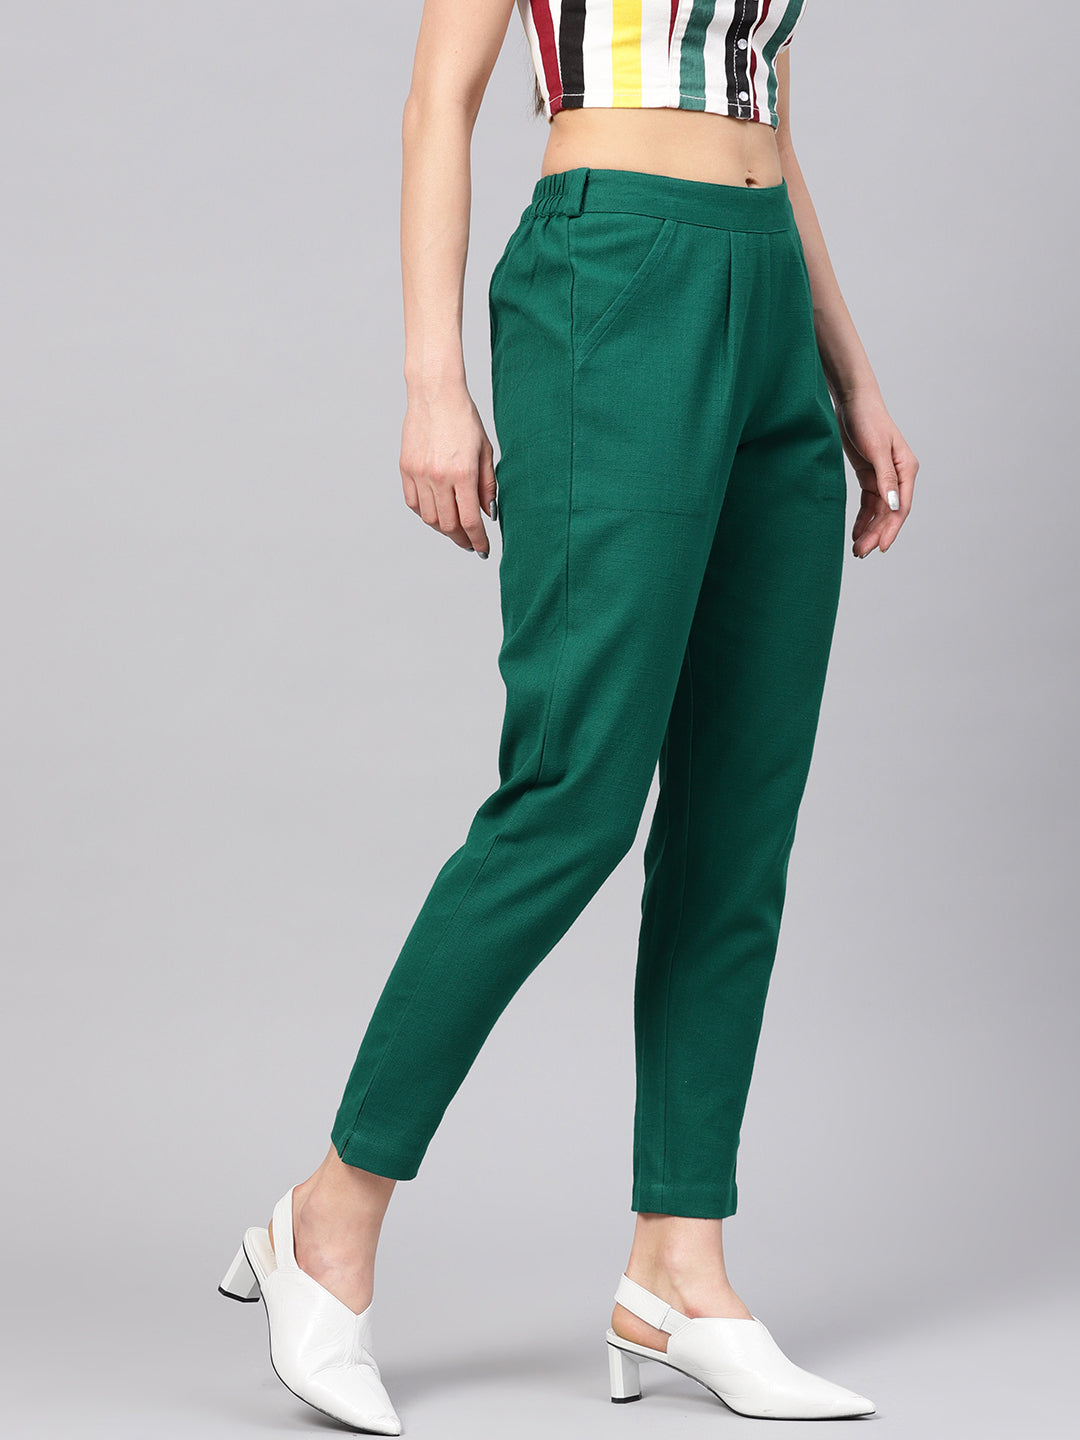 Buy Comfortable Trousers for Ladies